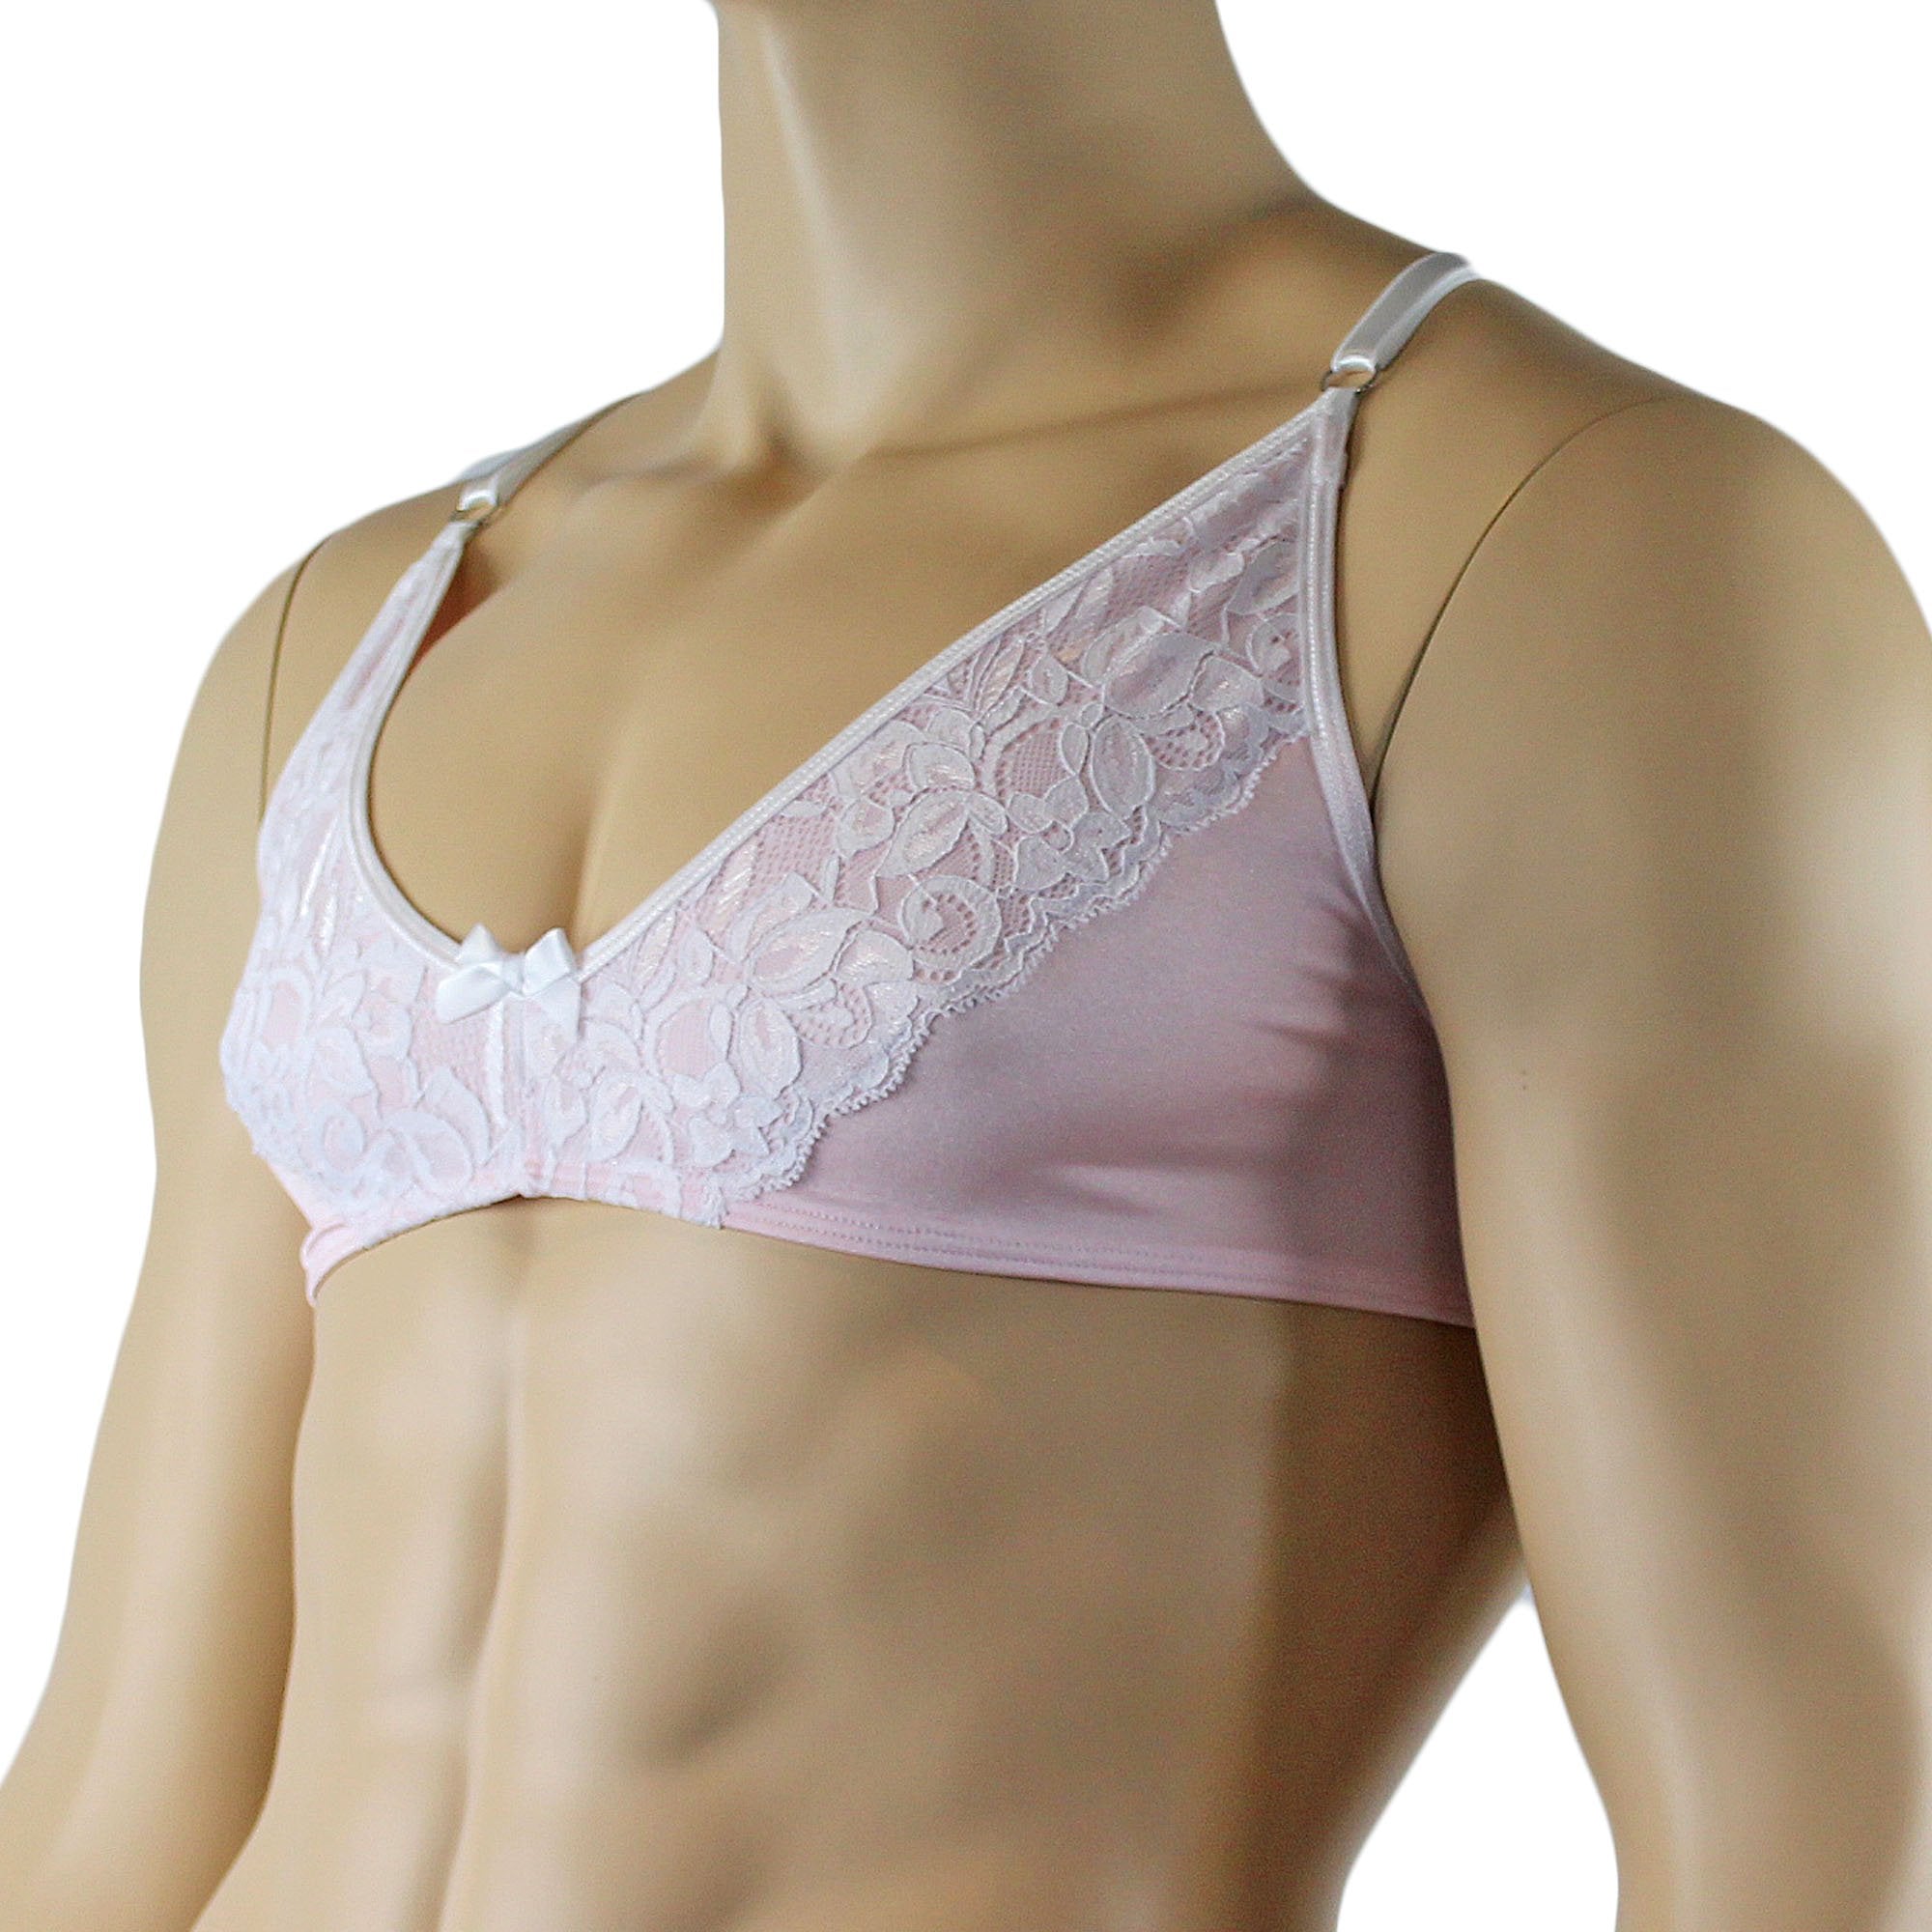 Mens Isabel Bra Top with Floral Lace Trim Male Lingerie Light Pink and White Lace